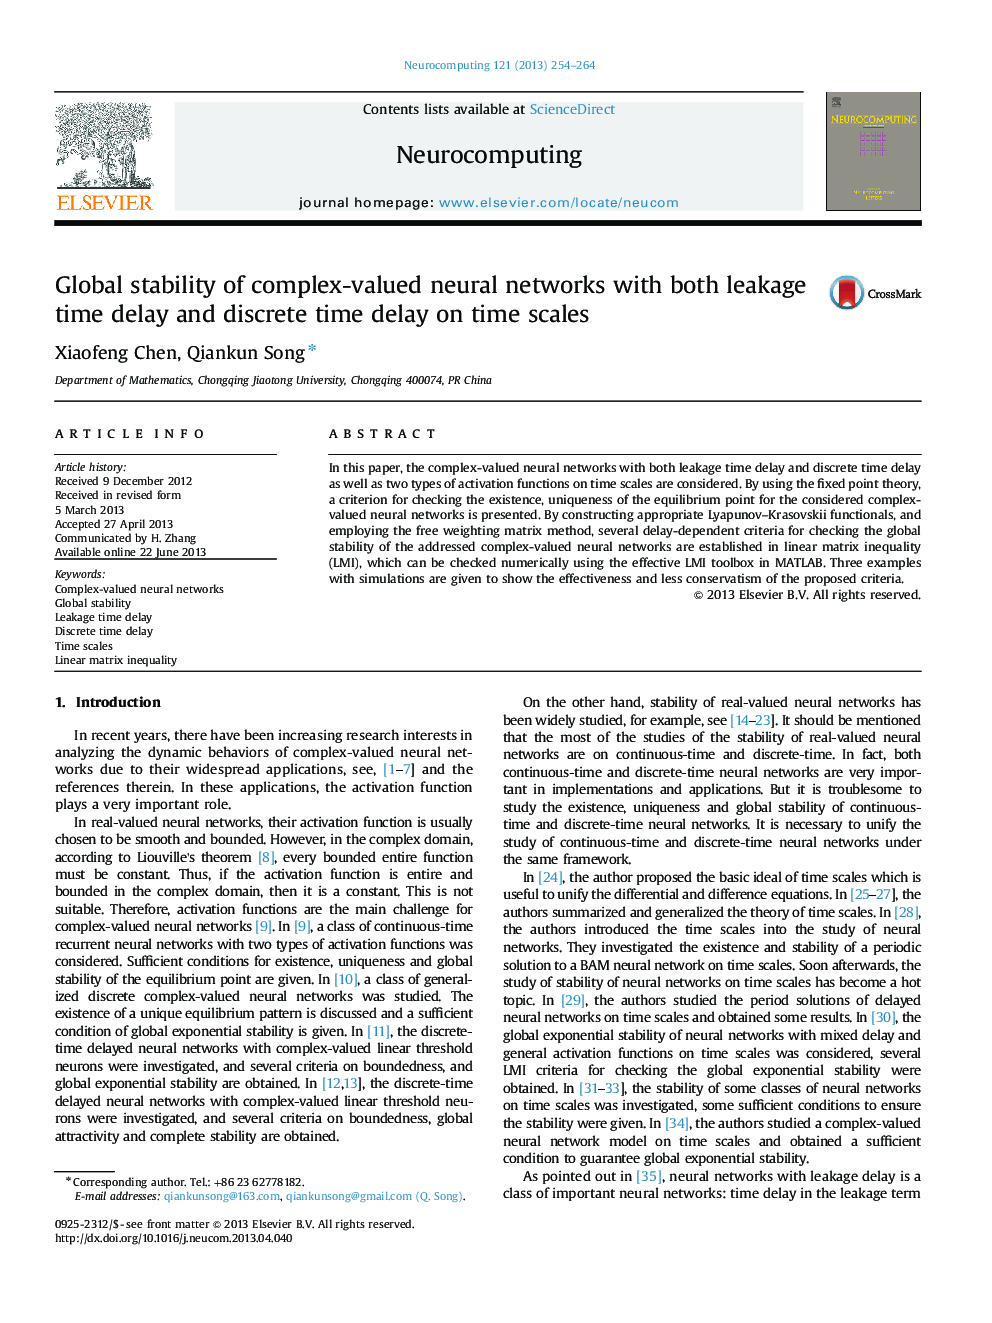 Global stability of complex-valued neural networks with both leakage time delay and discrete time delay on time scales